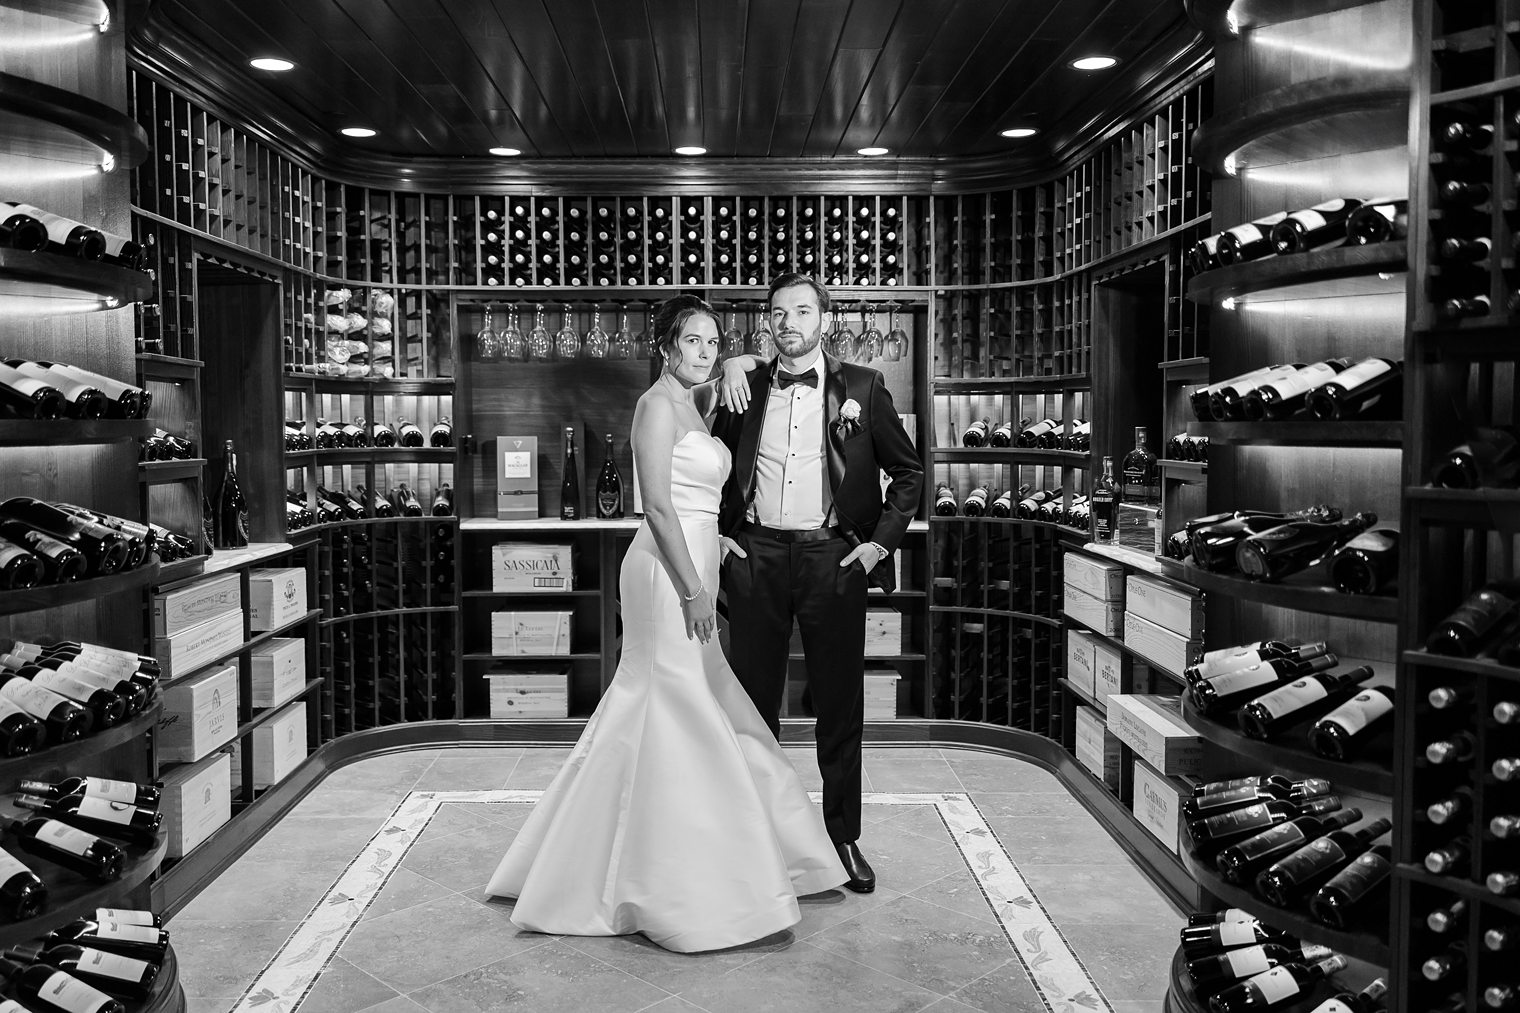 Husband and wife n the wine cellar 